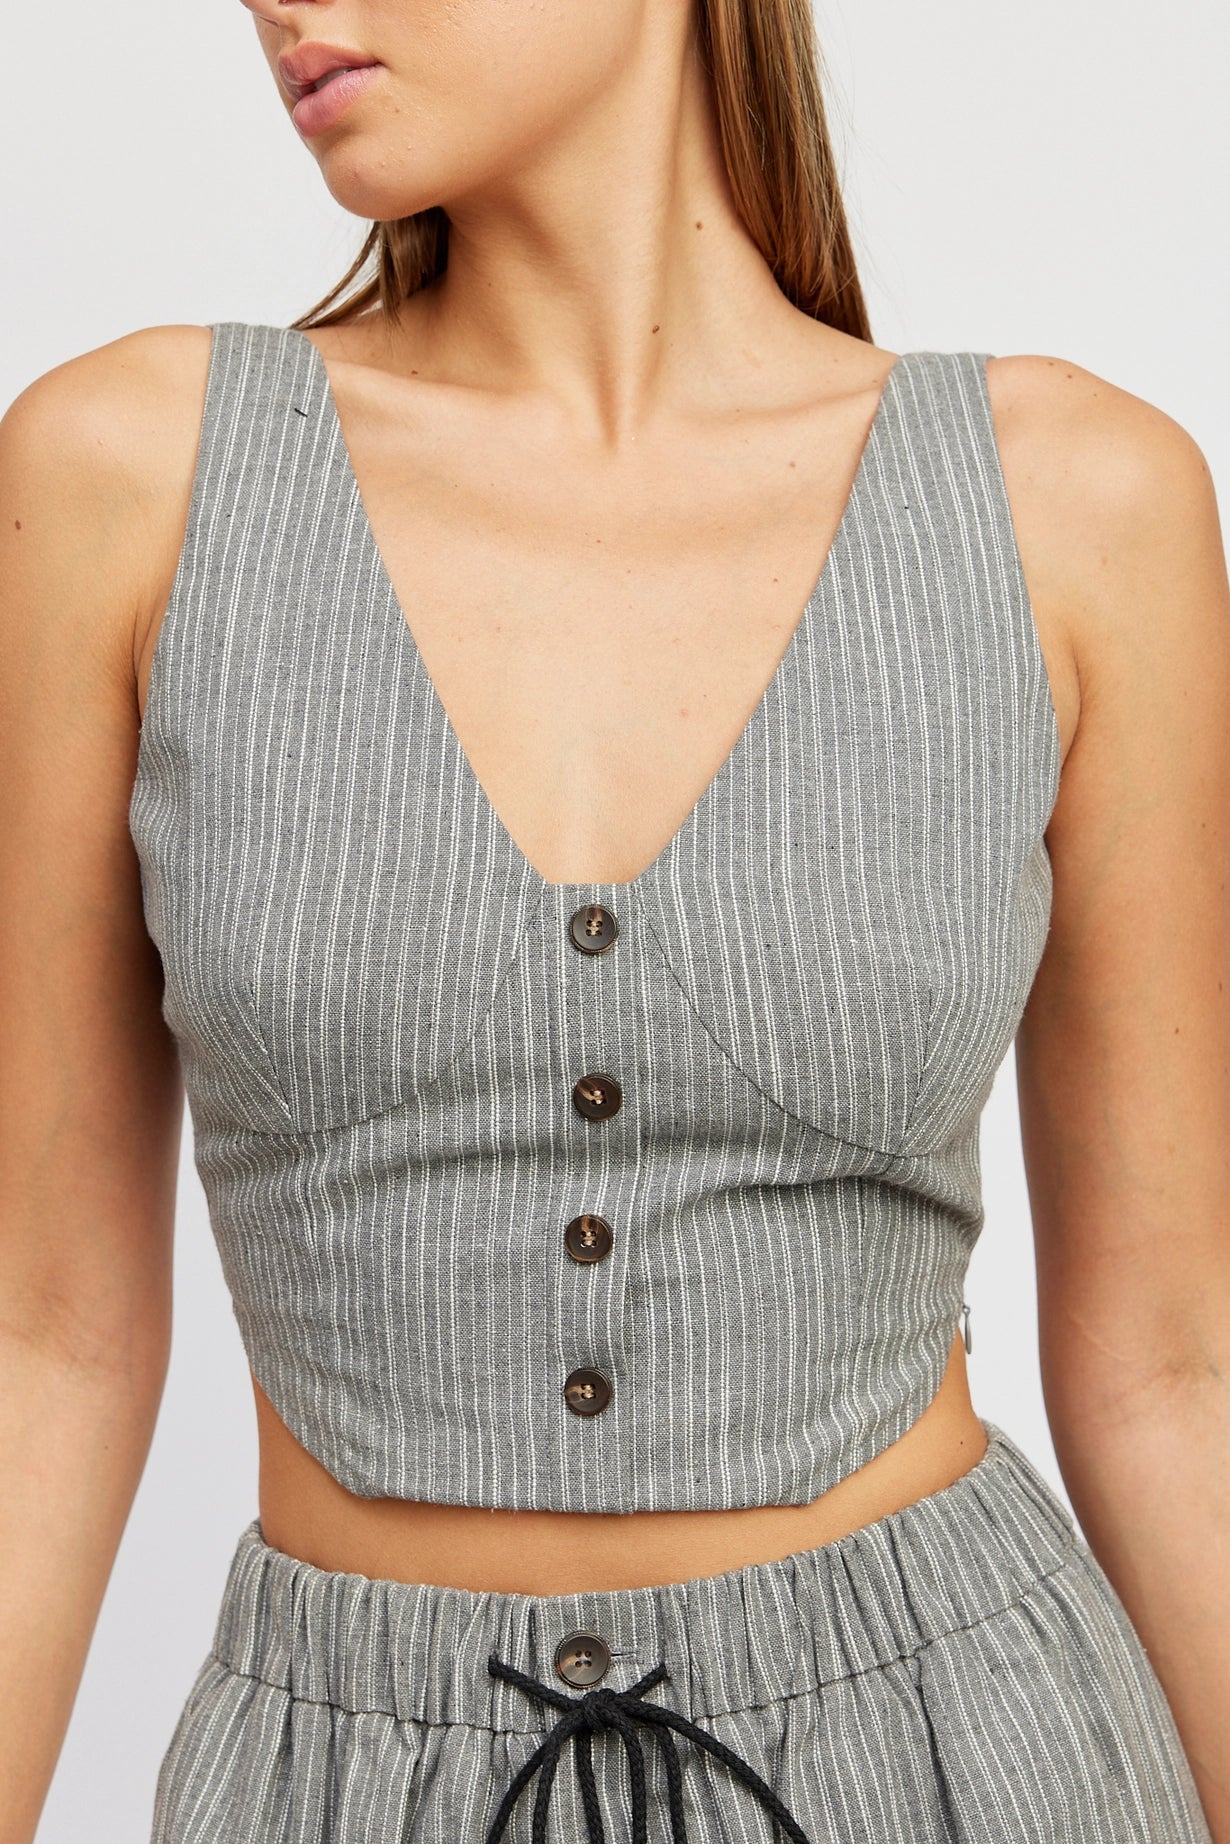 She Means Business Crop Top